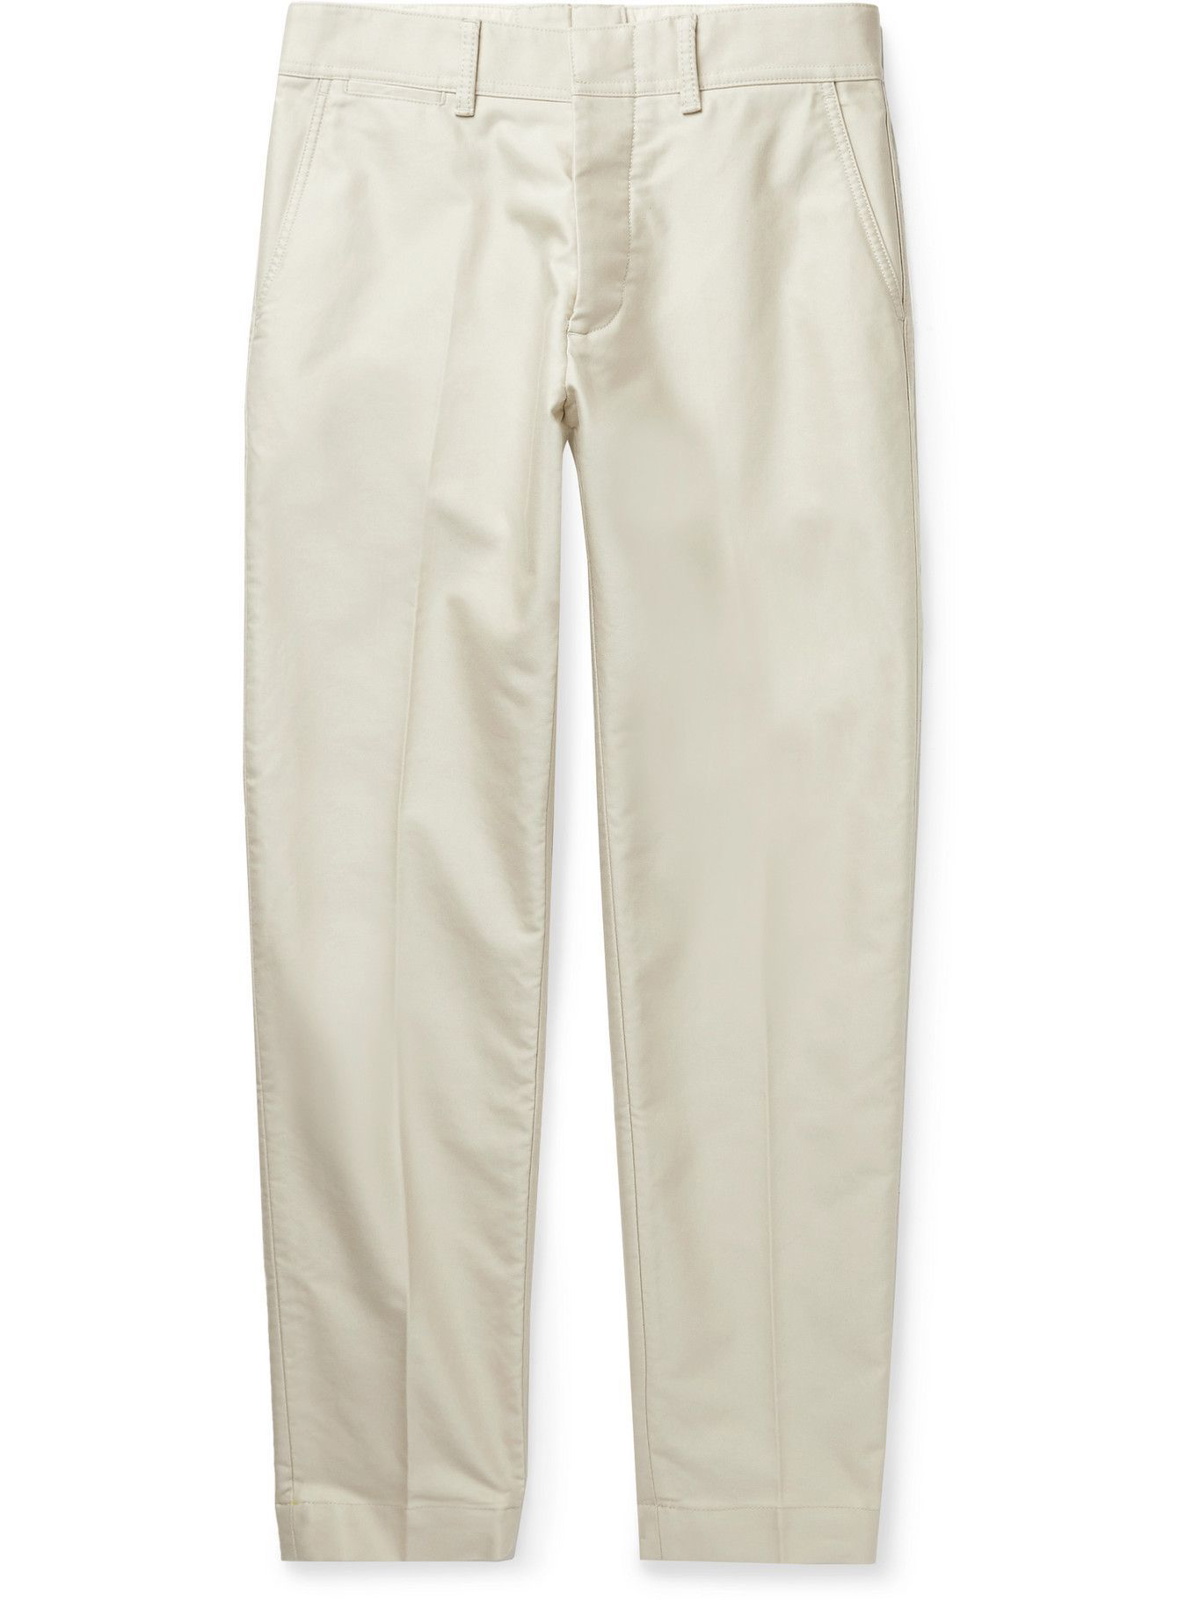 TOM FORD - Cotton Chinos - Neutrals TOM FORD